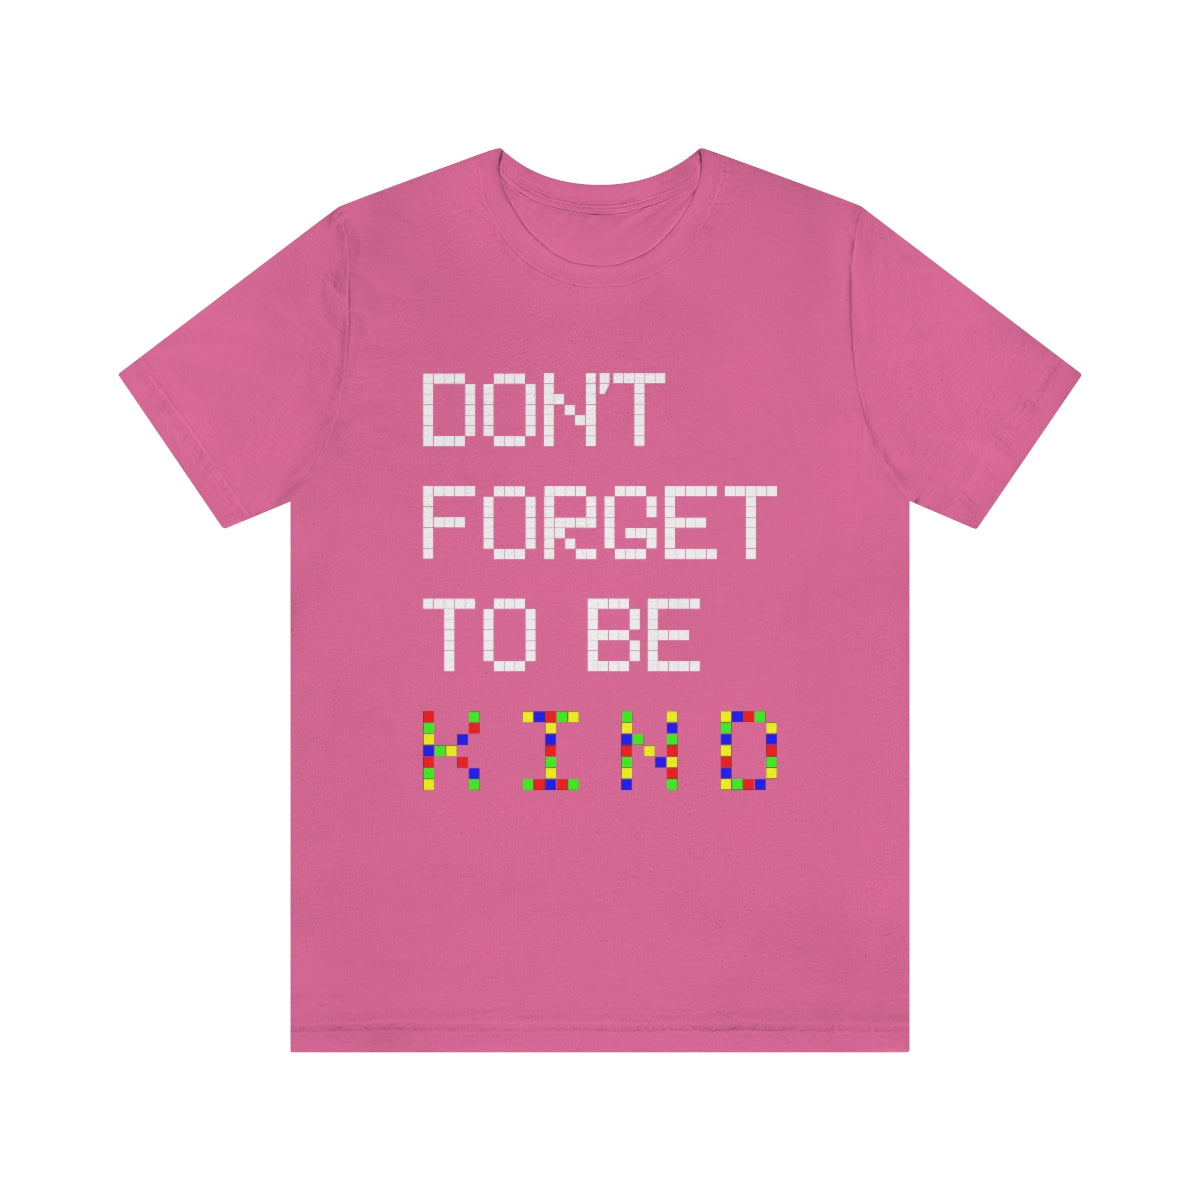 Unisex Jersey Short Sleeve Tee "Pink shirt DAY Don't forget to be KIND"